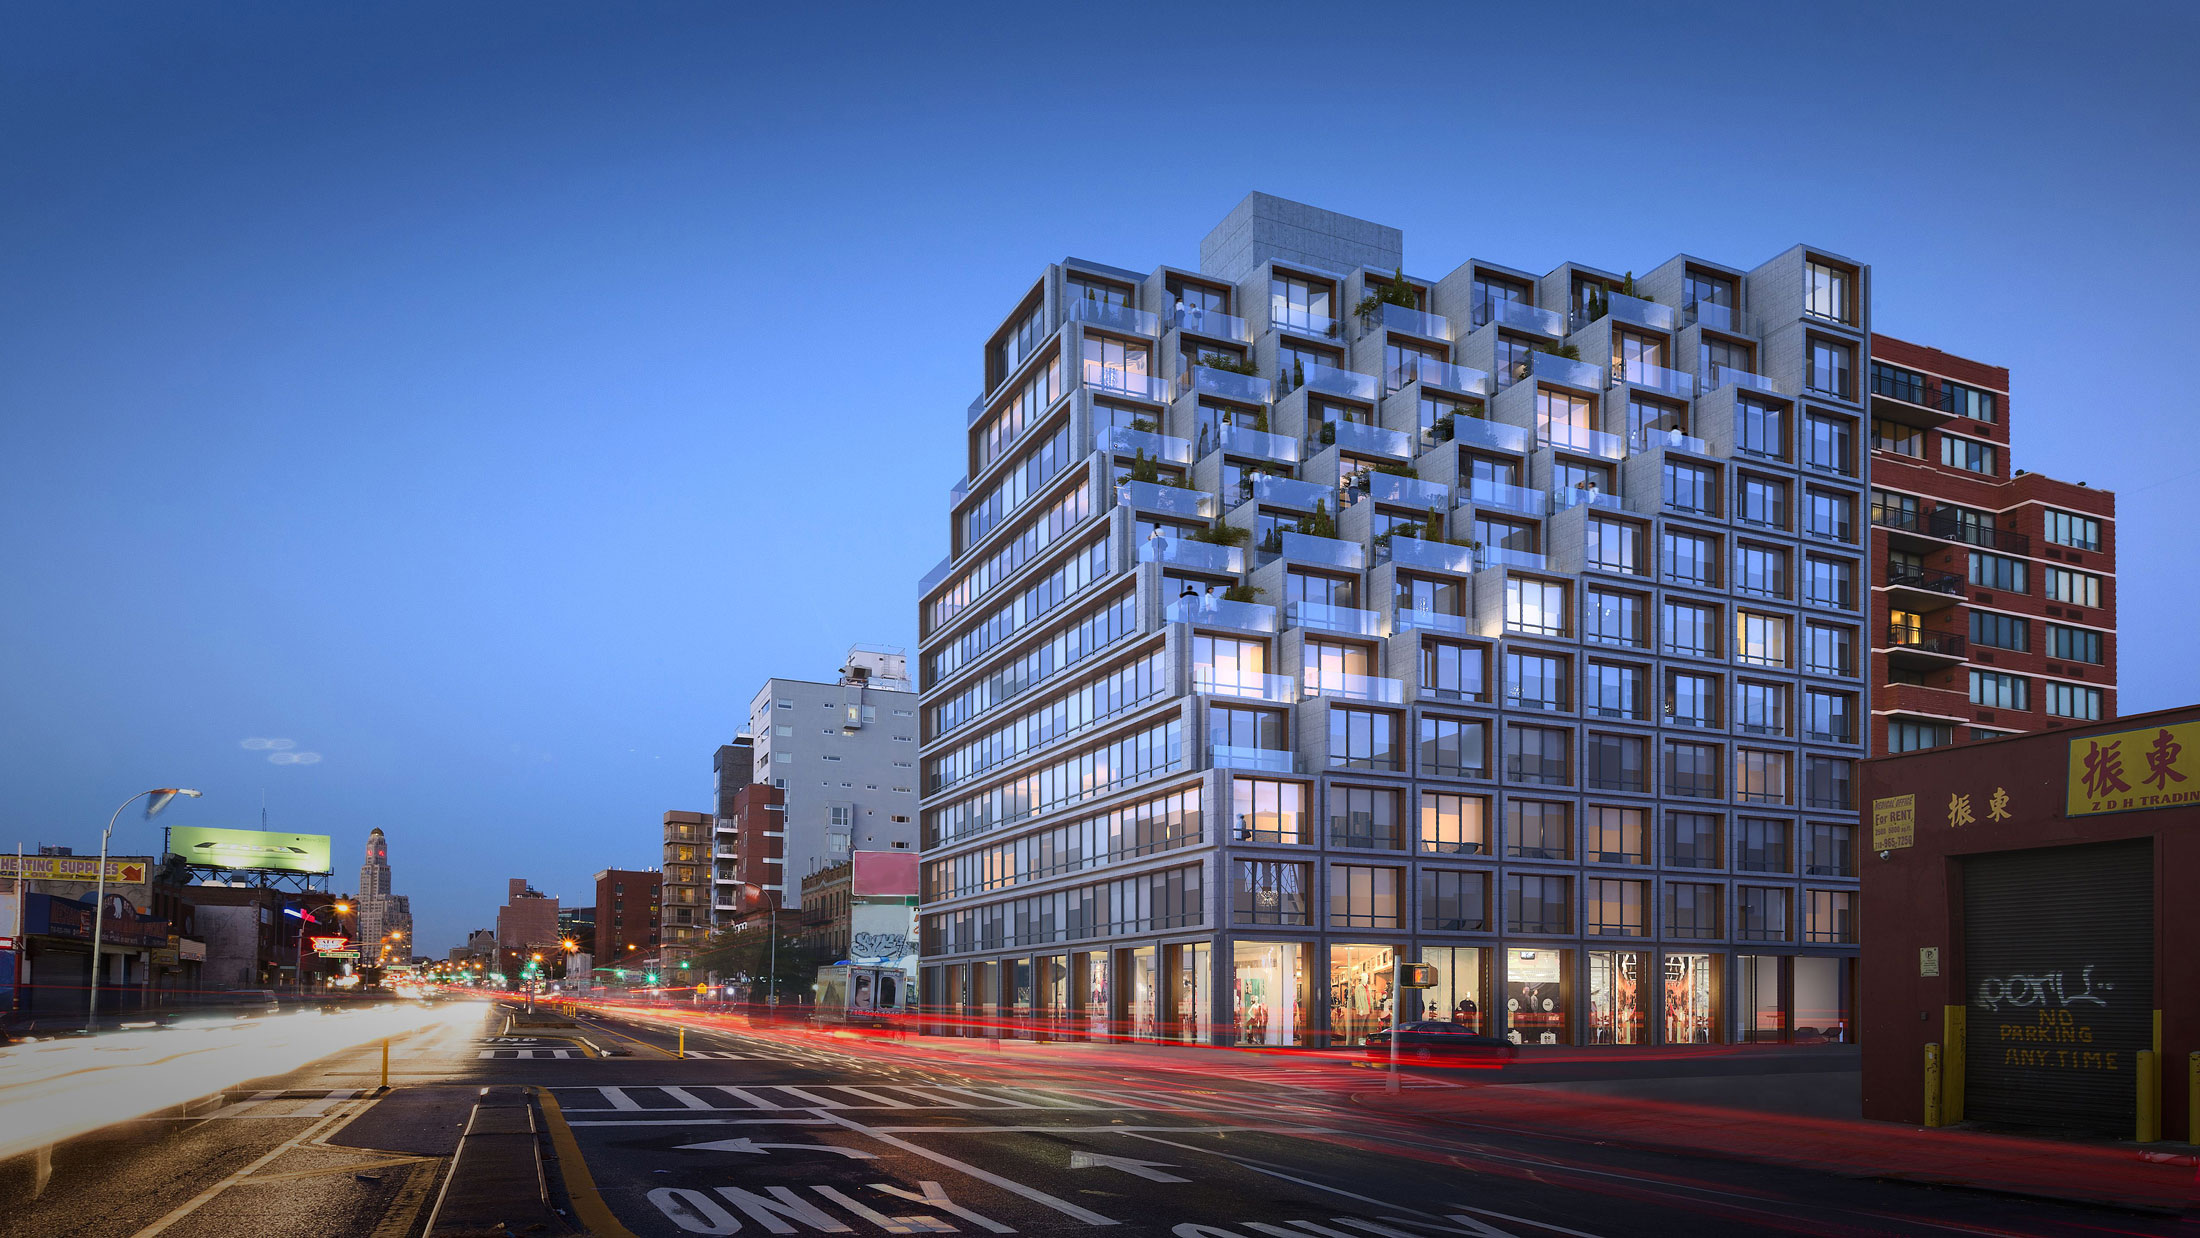 Architectural Rendering of the exterior of the 275 Fourth Avenue project located in Brooklyn, New York